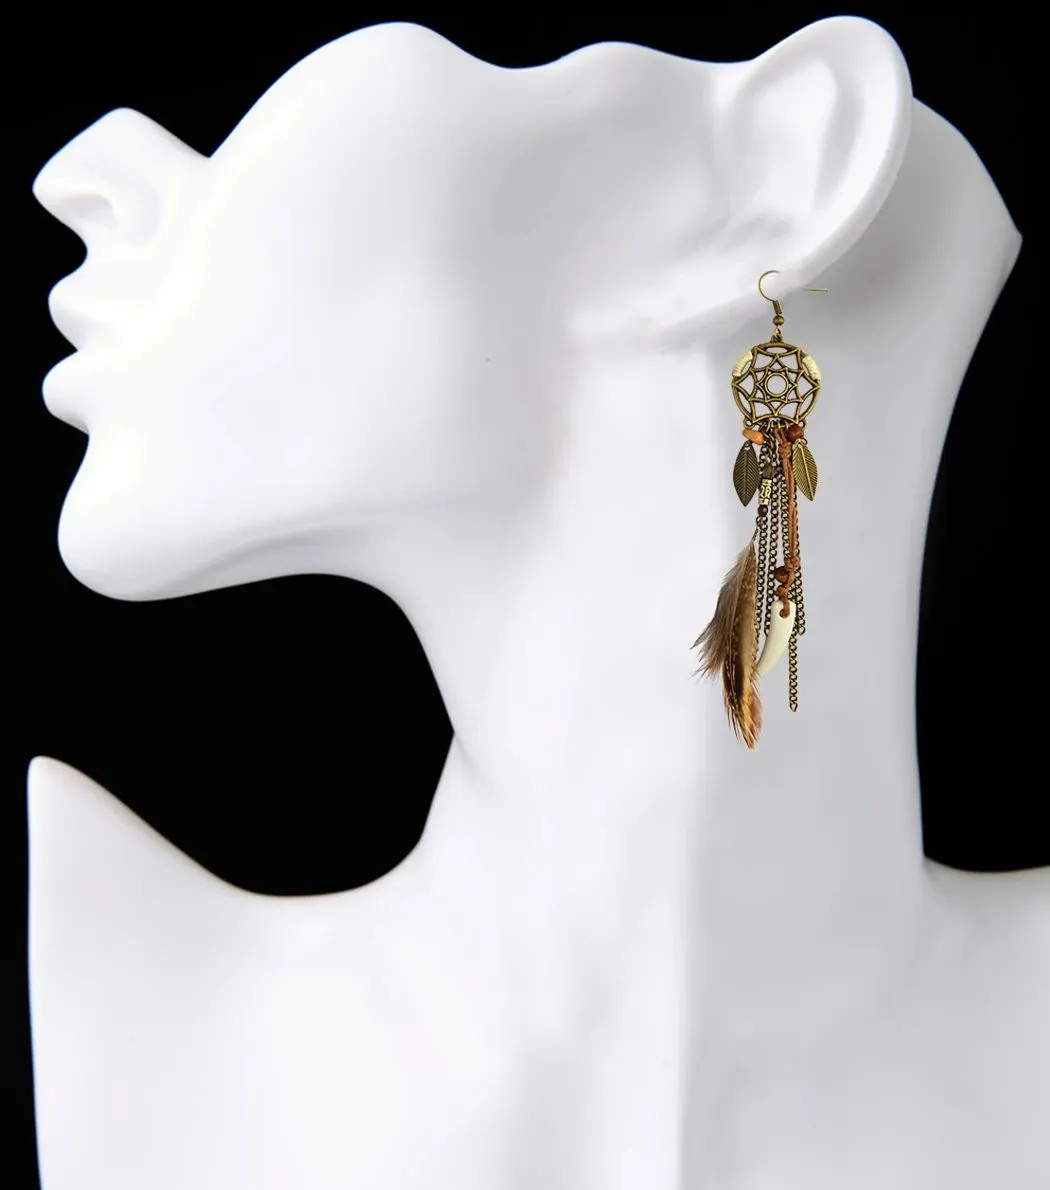 Antique Bronze Tassel Feather Star Resin Drop Earrings With Fish Hook For  Womens Fashion Jewelry From Idealway, $1.01